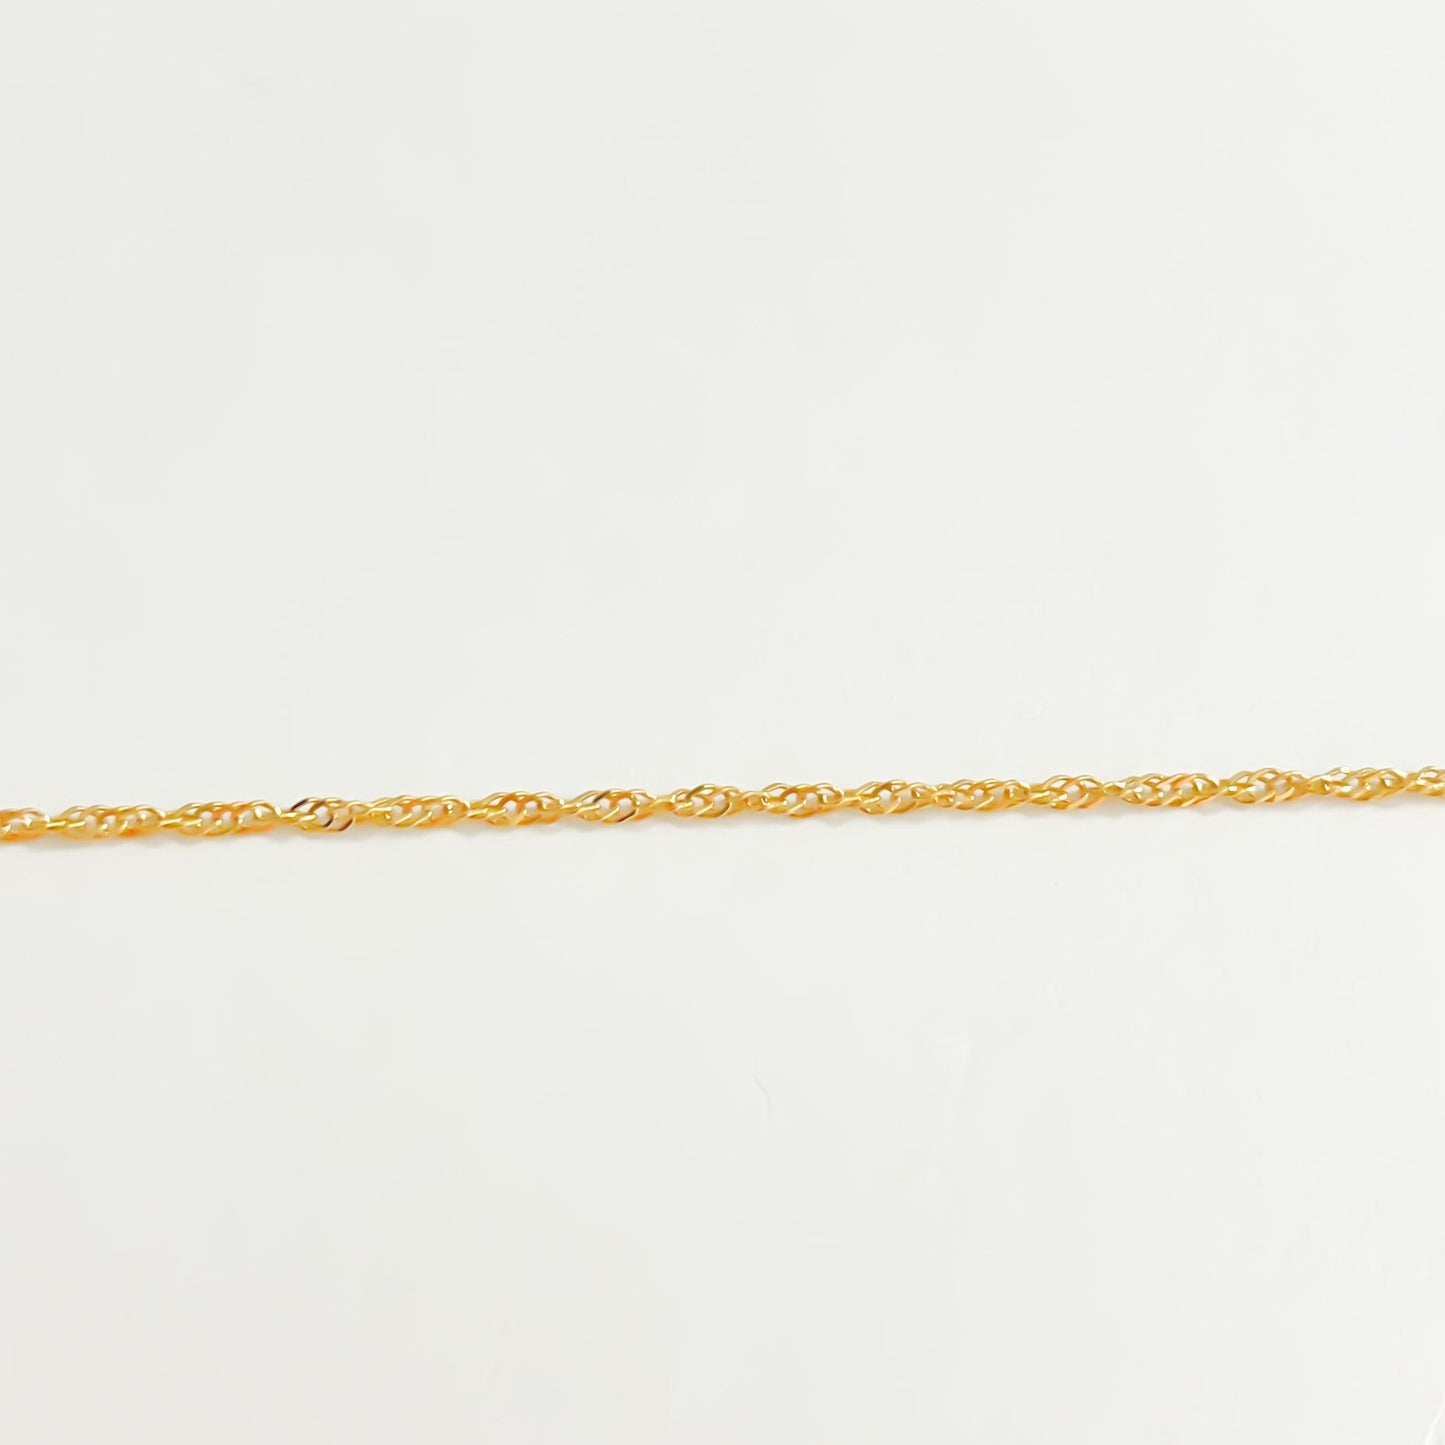 THE INITIAL BLOCK NECKLACE